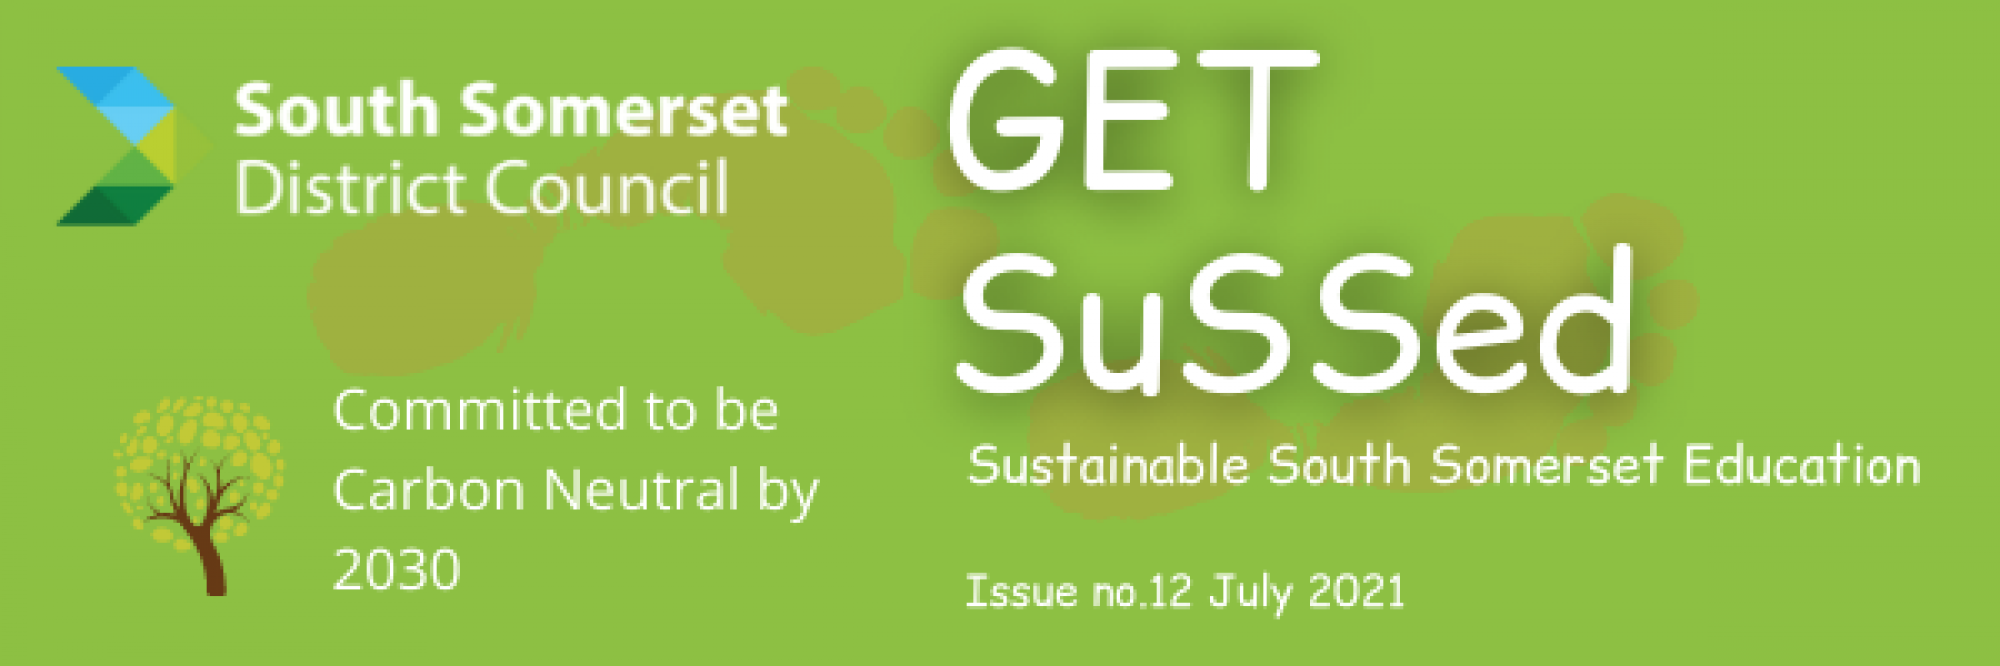 💚Get SuSSed! Environment NEWS,GRANTS,LEARNING AND MORE!💚